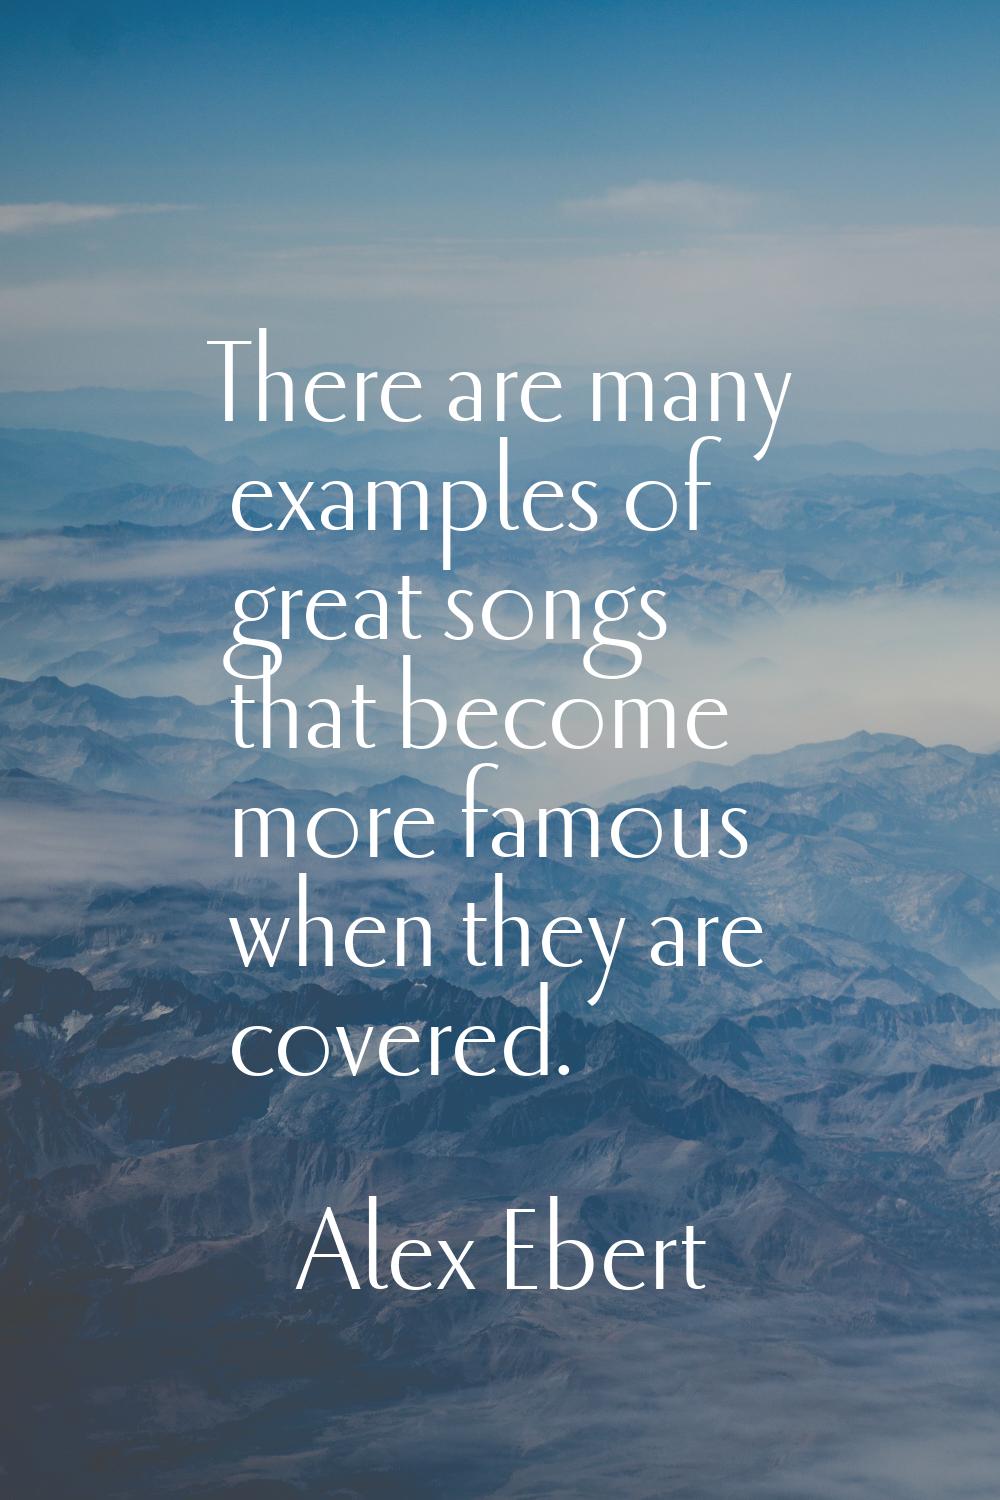 There are many examples of great songs that become more famous when they are covered.